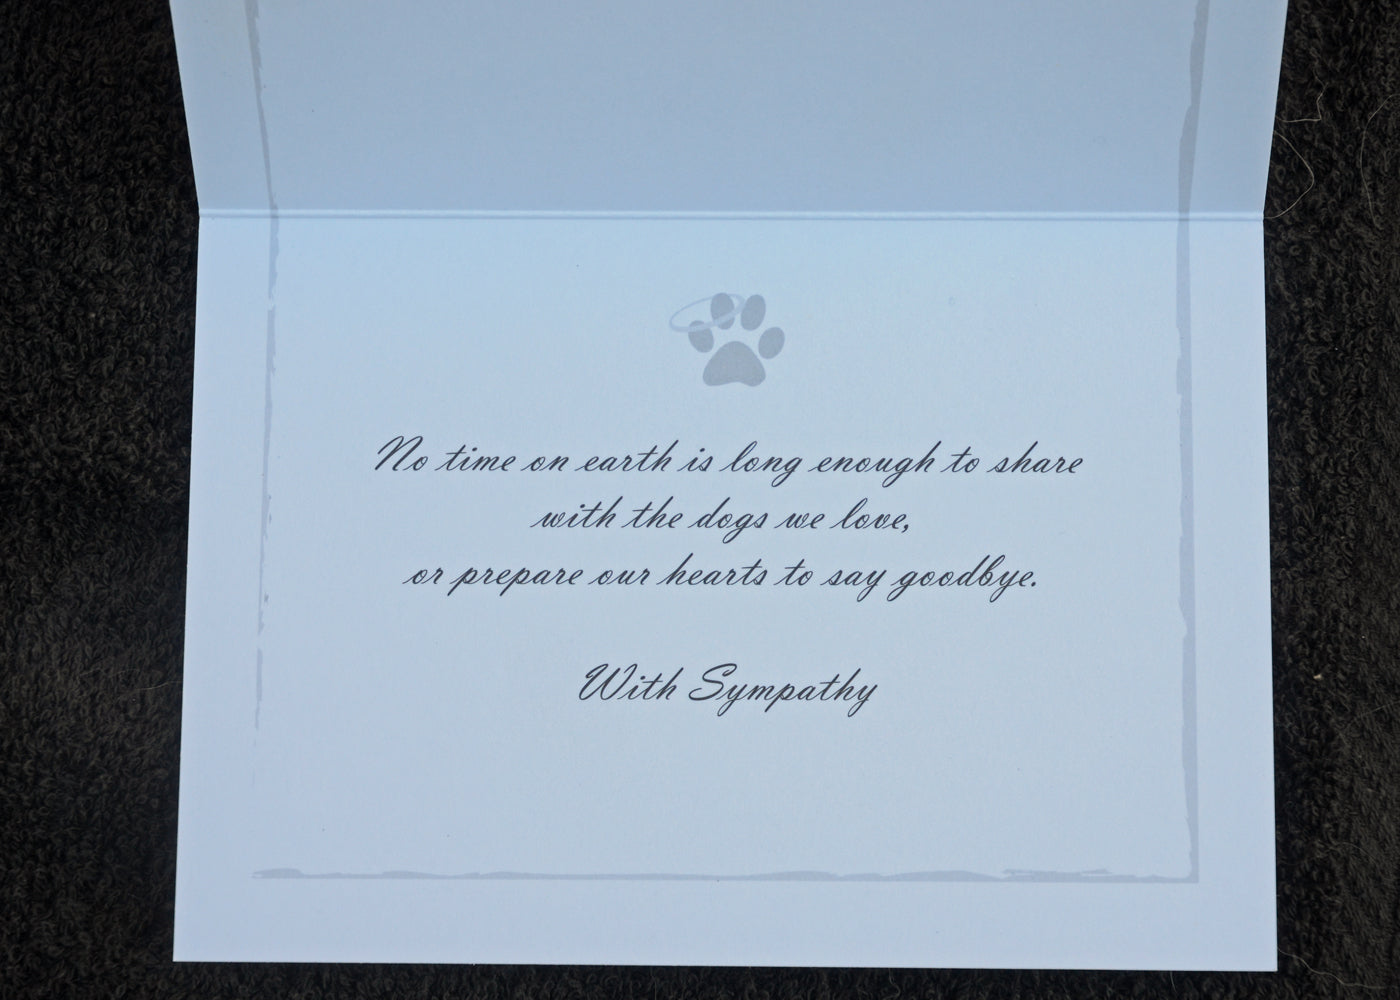 Always Remembered and Forever Loved, Sympathy Card